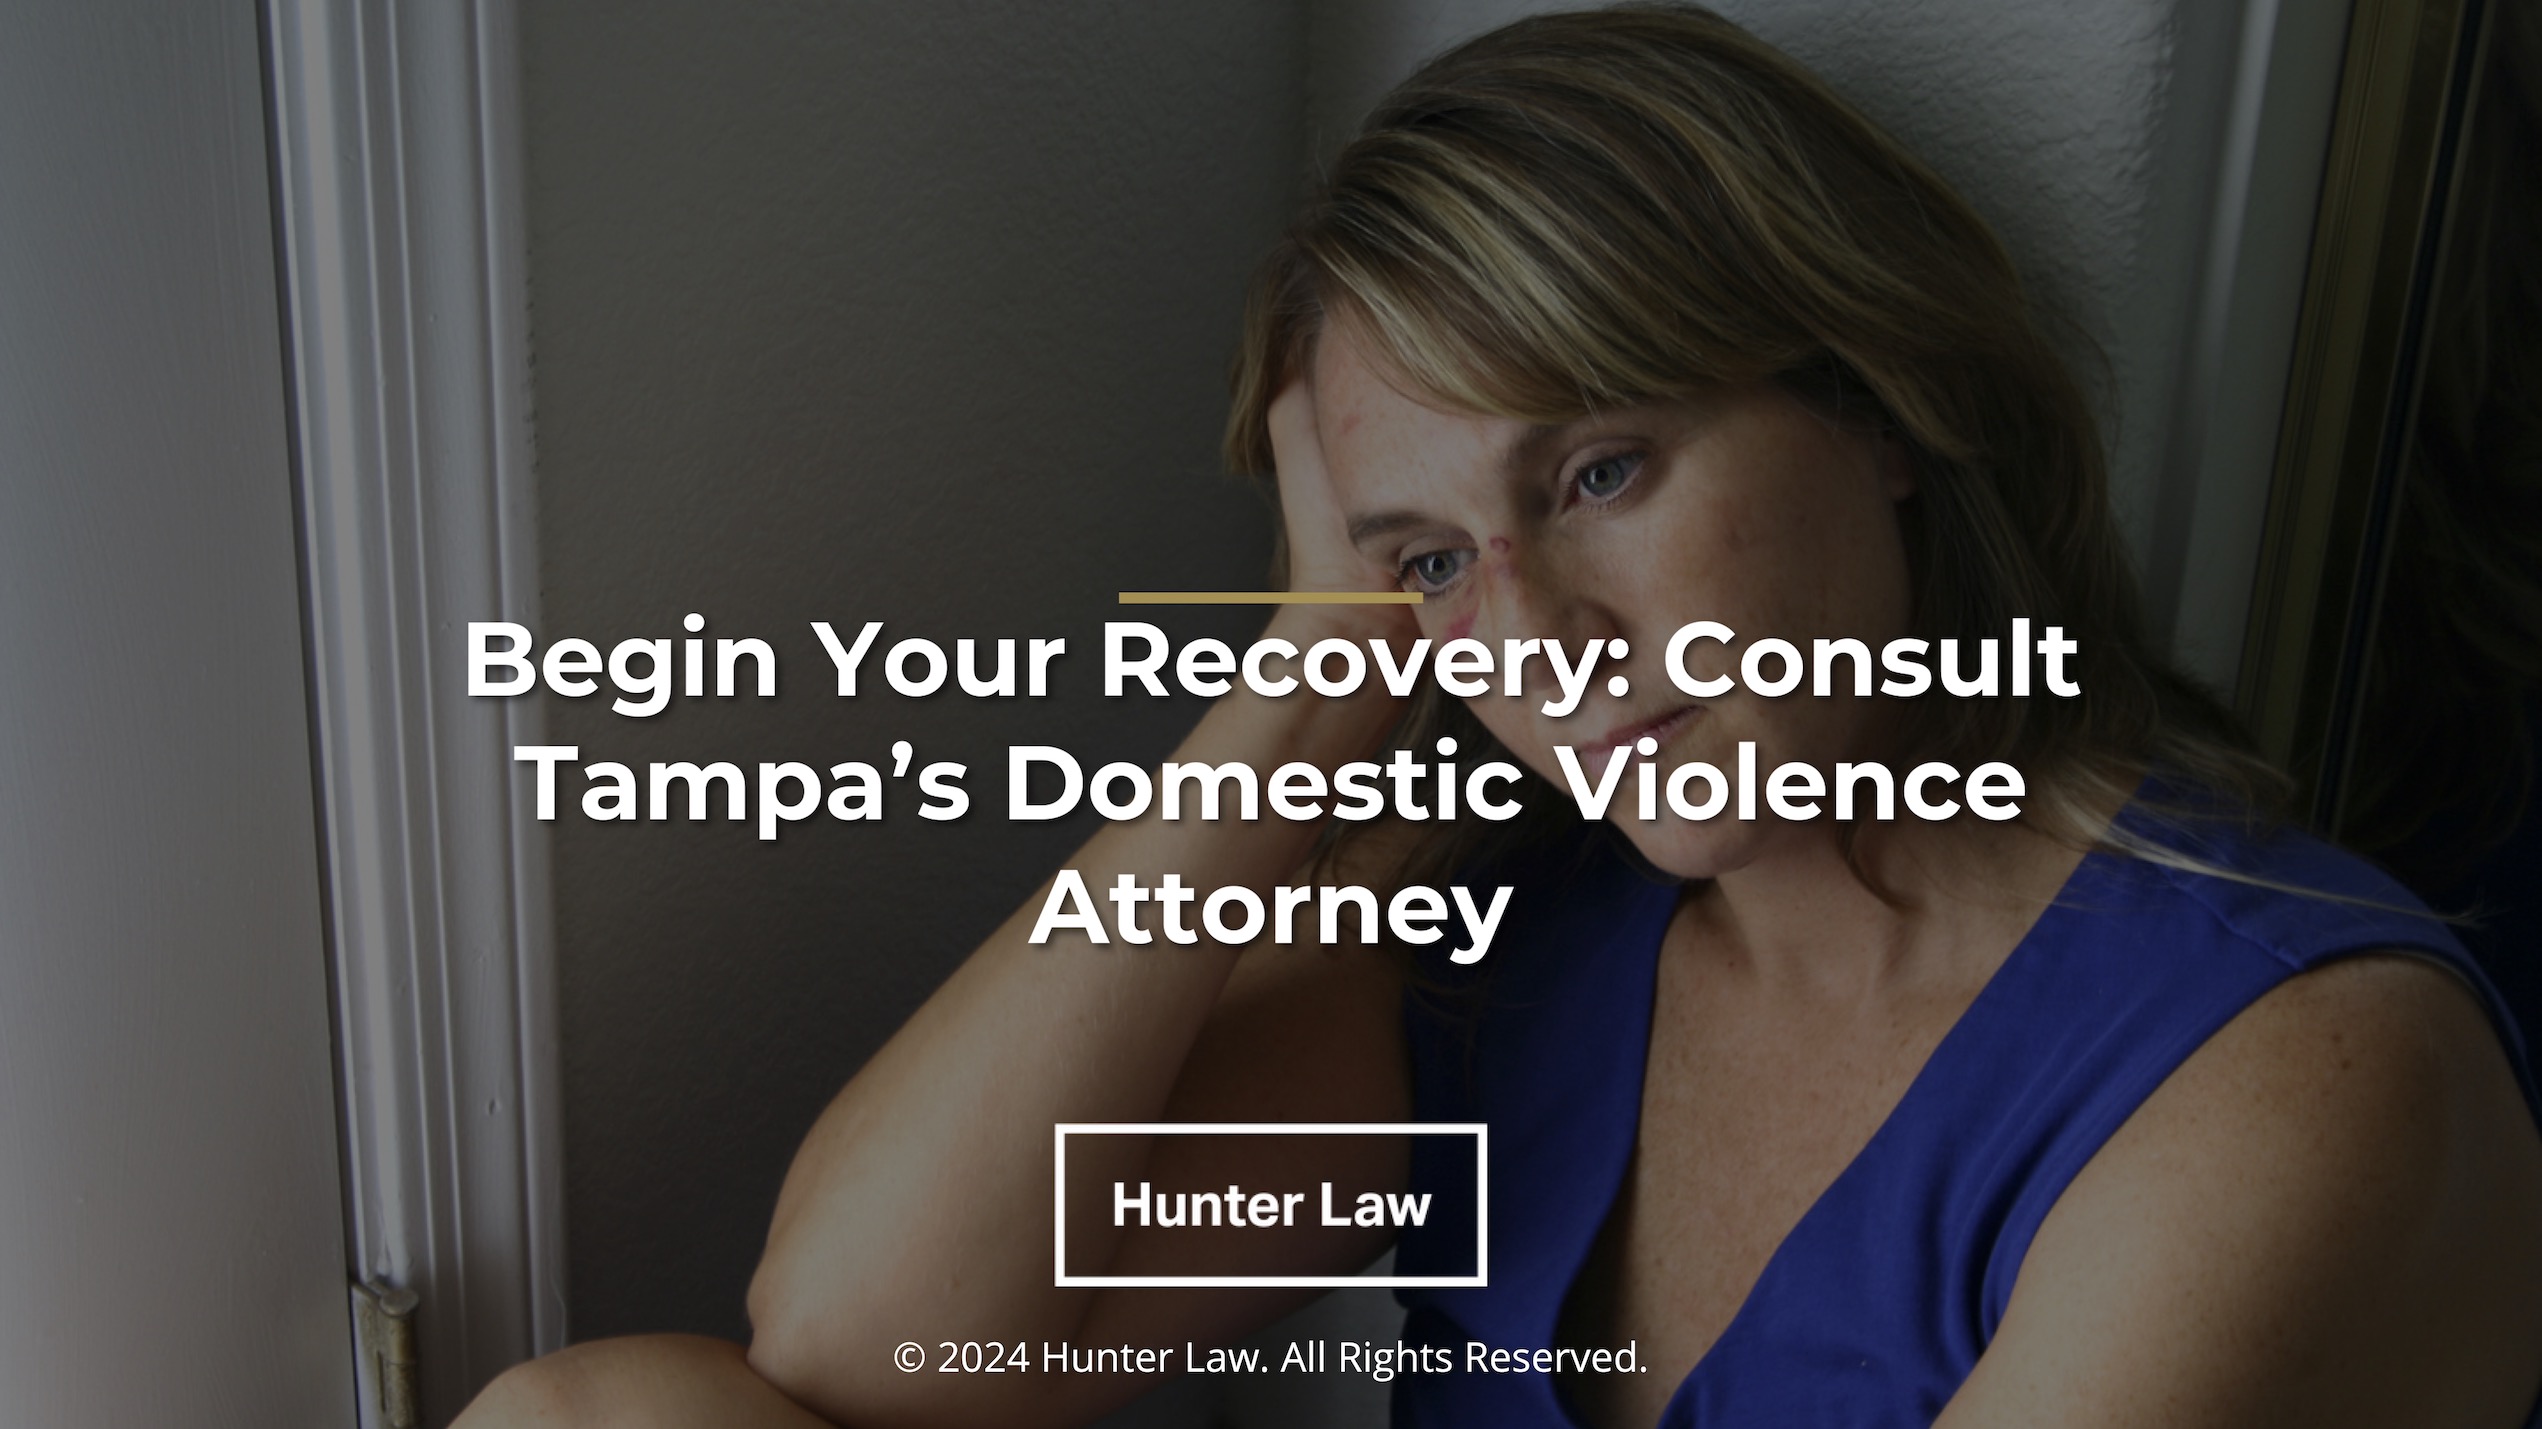 Hunter Law_Featured – Begin Your Recovery – Consult Tampa’s Domestic Violence Attorney – adjusted